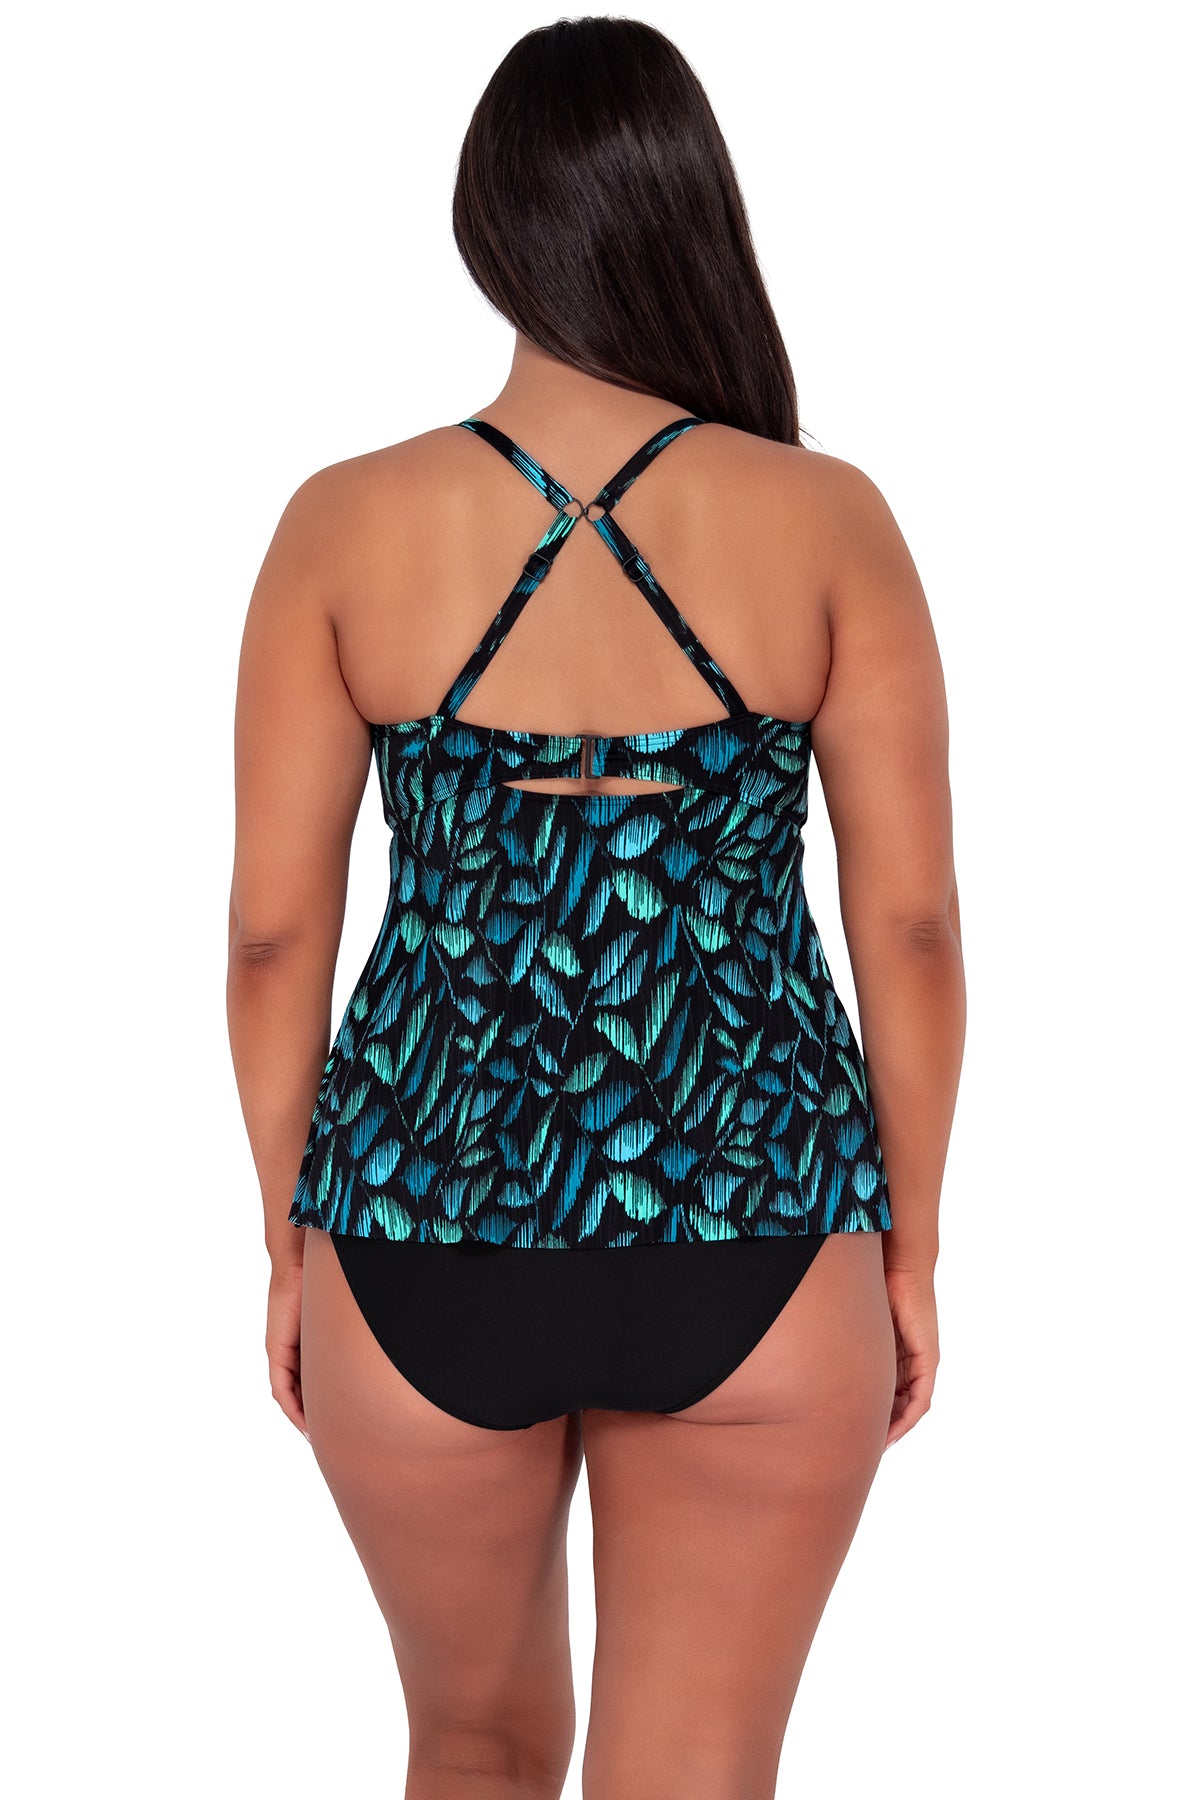 Back pose #1 of Nicki wearing Sunsets Escape Cascade Seagrass Texture Tori Tankini Top 